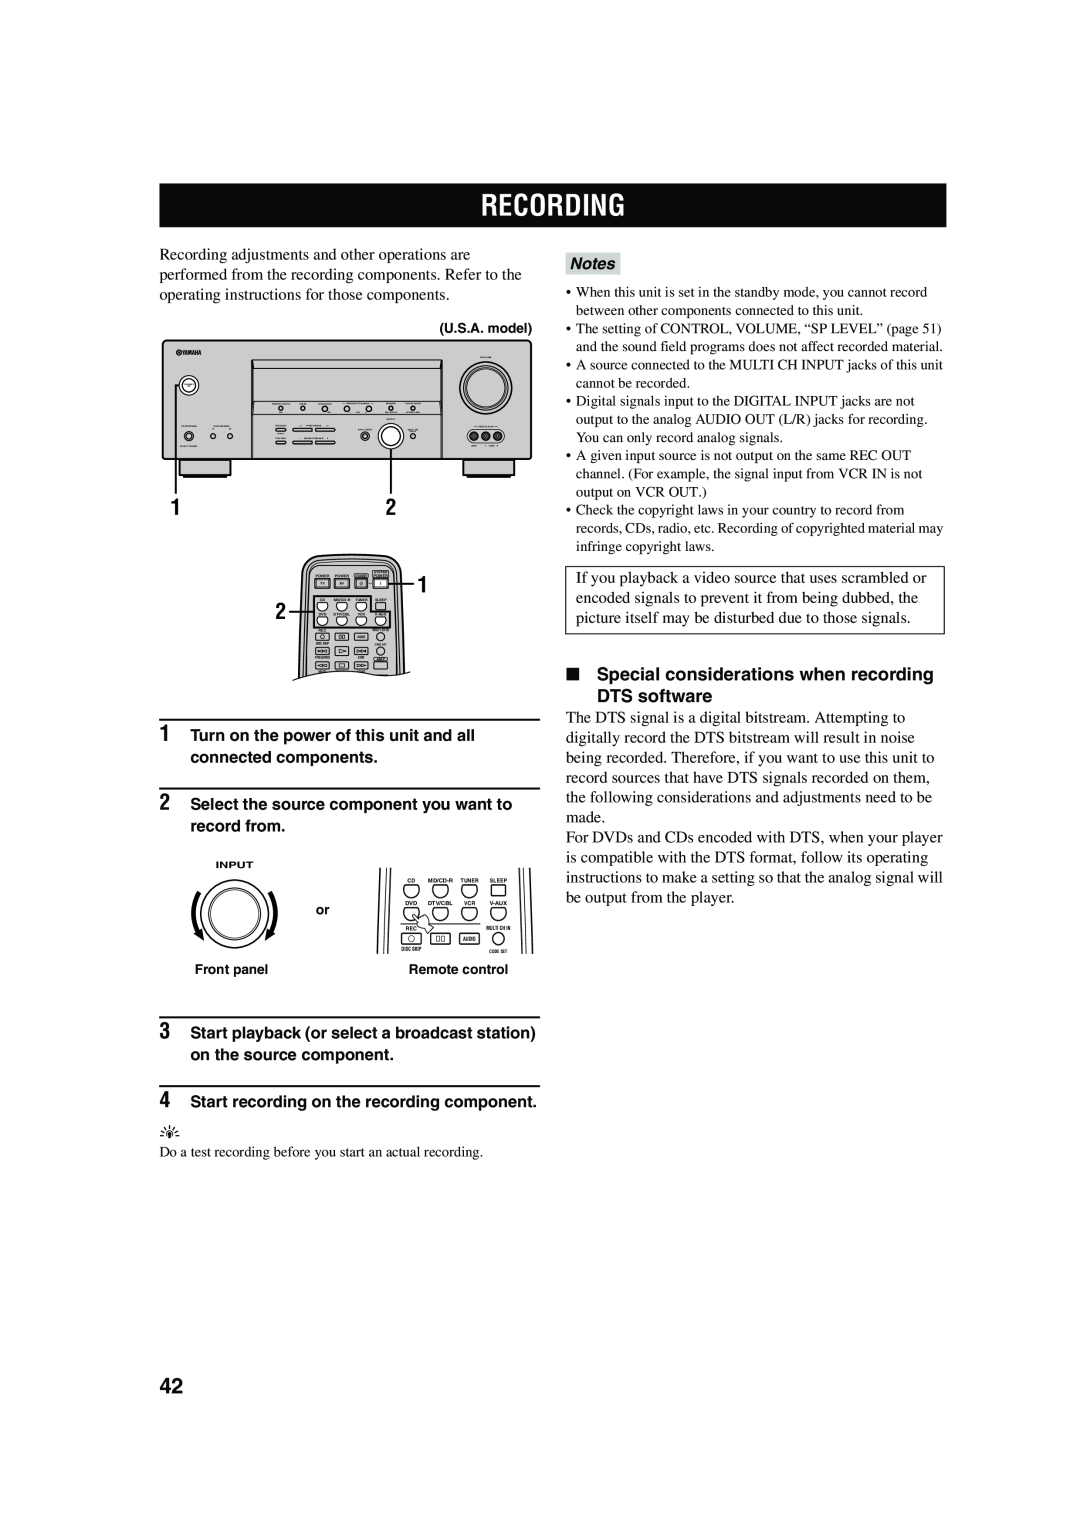 Yamaha RX-V450 Recording, Special considerations when recording, DTS software, 4Start recording on the recording component 